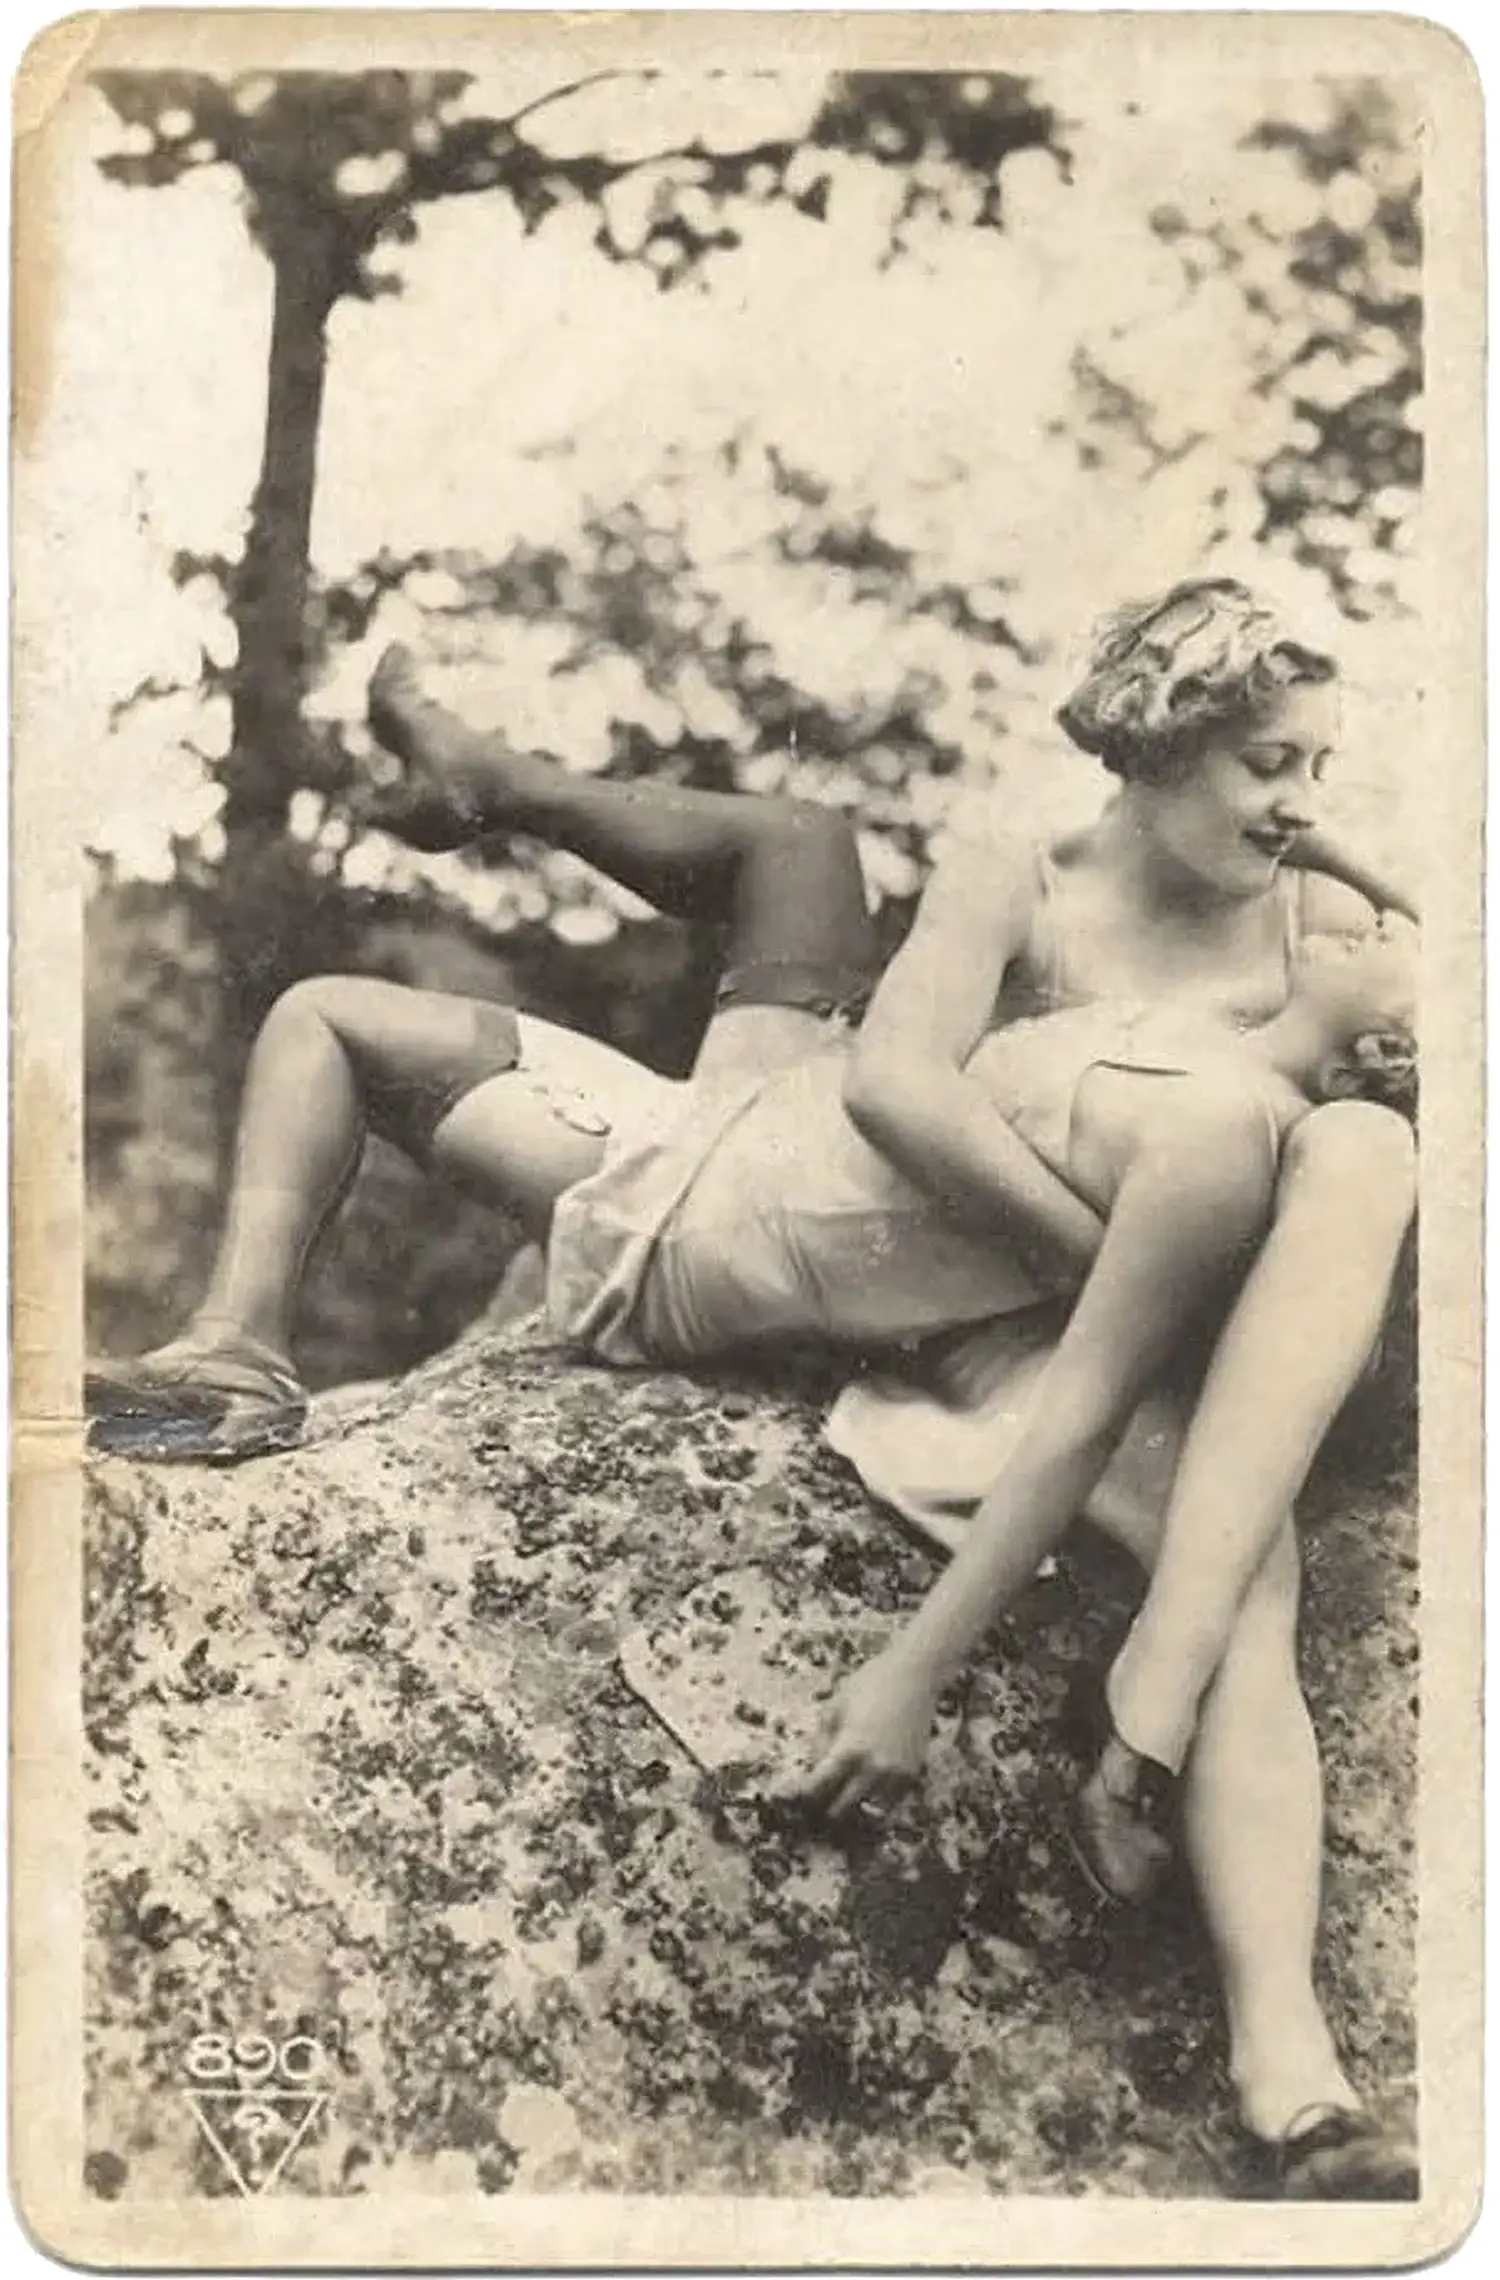 A weathered photograph of two women relaxing atop a large rock outdoors. One woman lies on her back, held by the other, who looks down at her face, smiling.